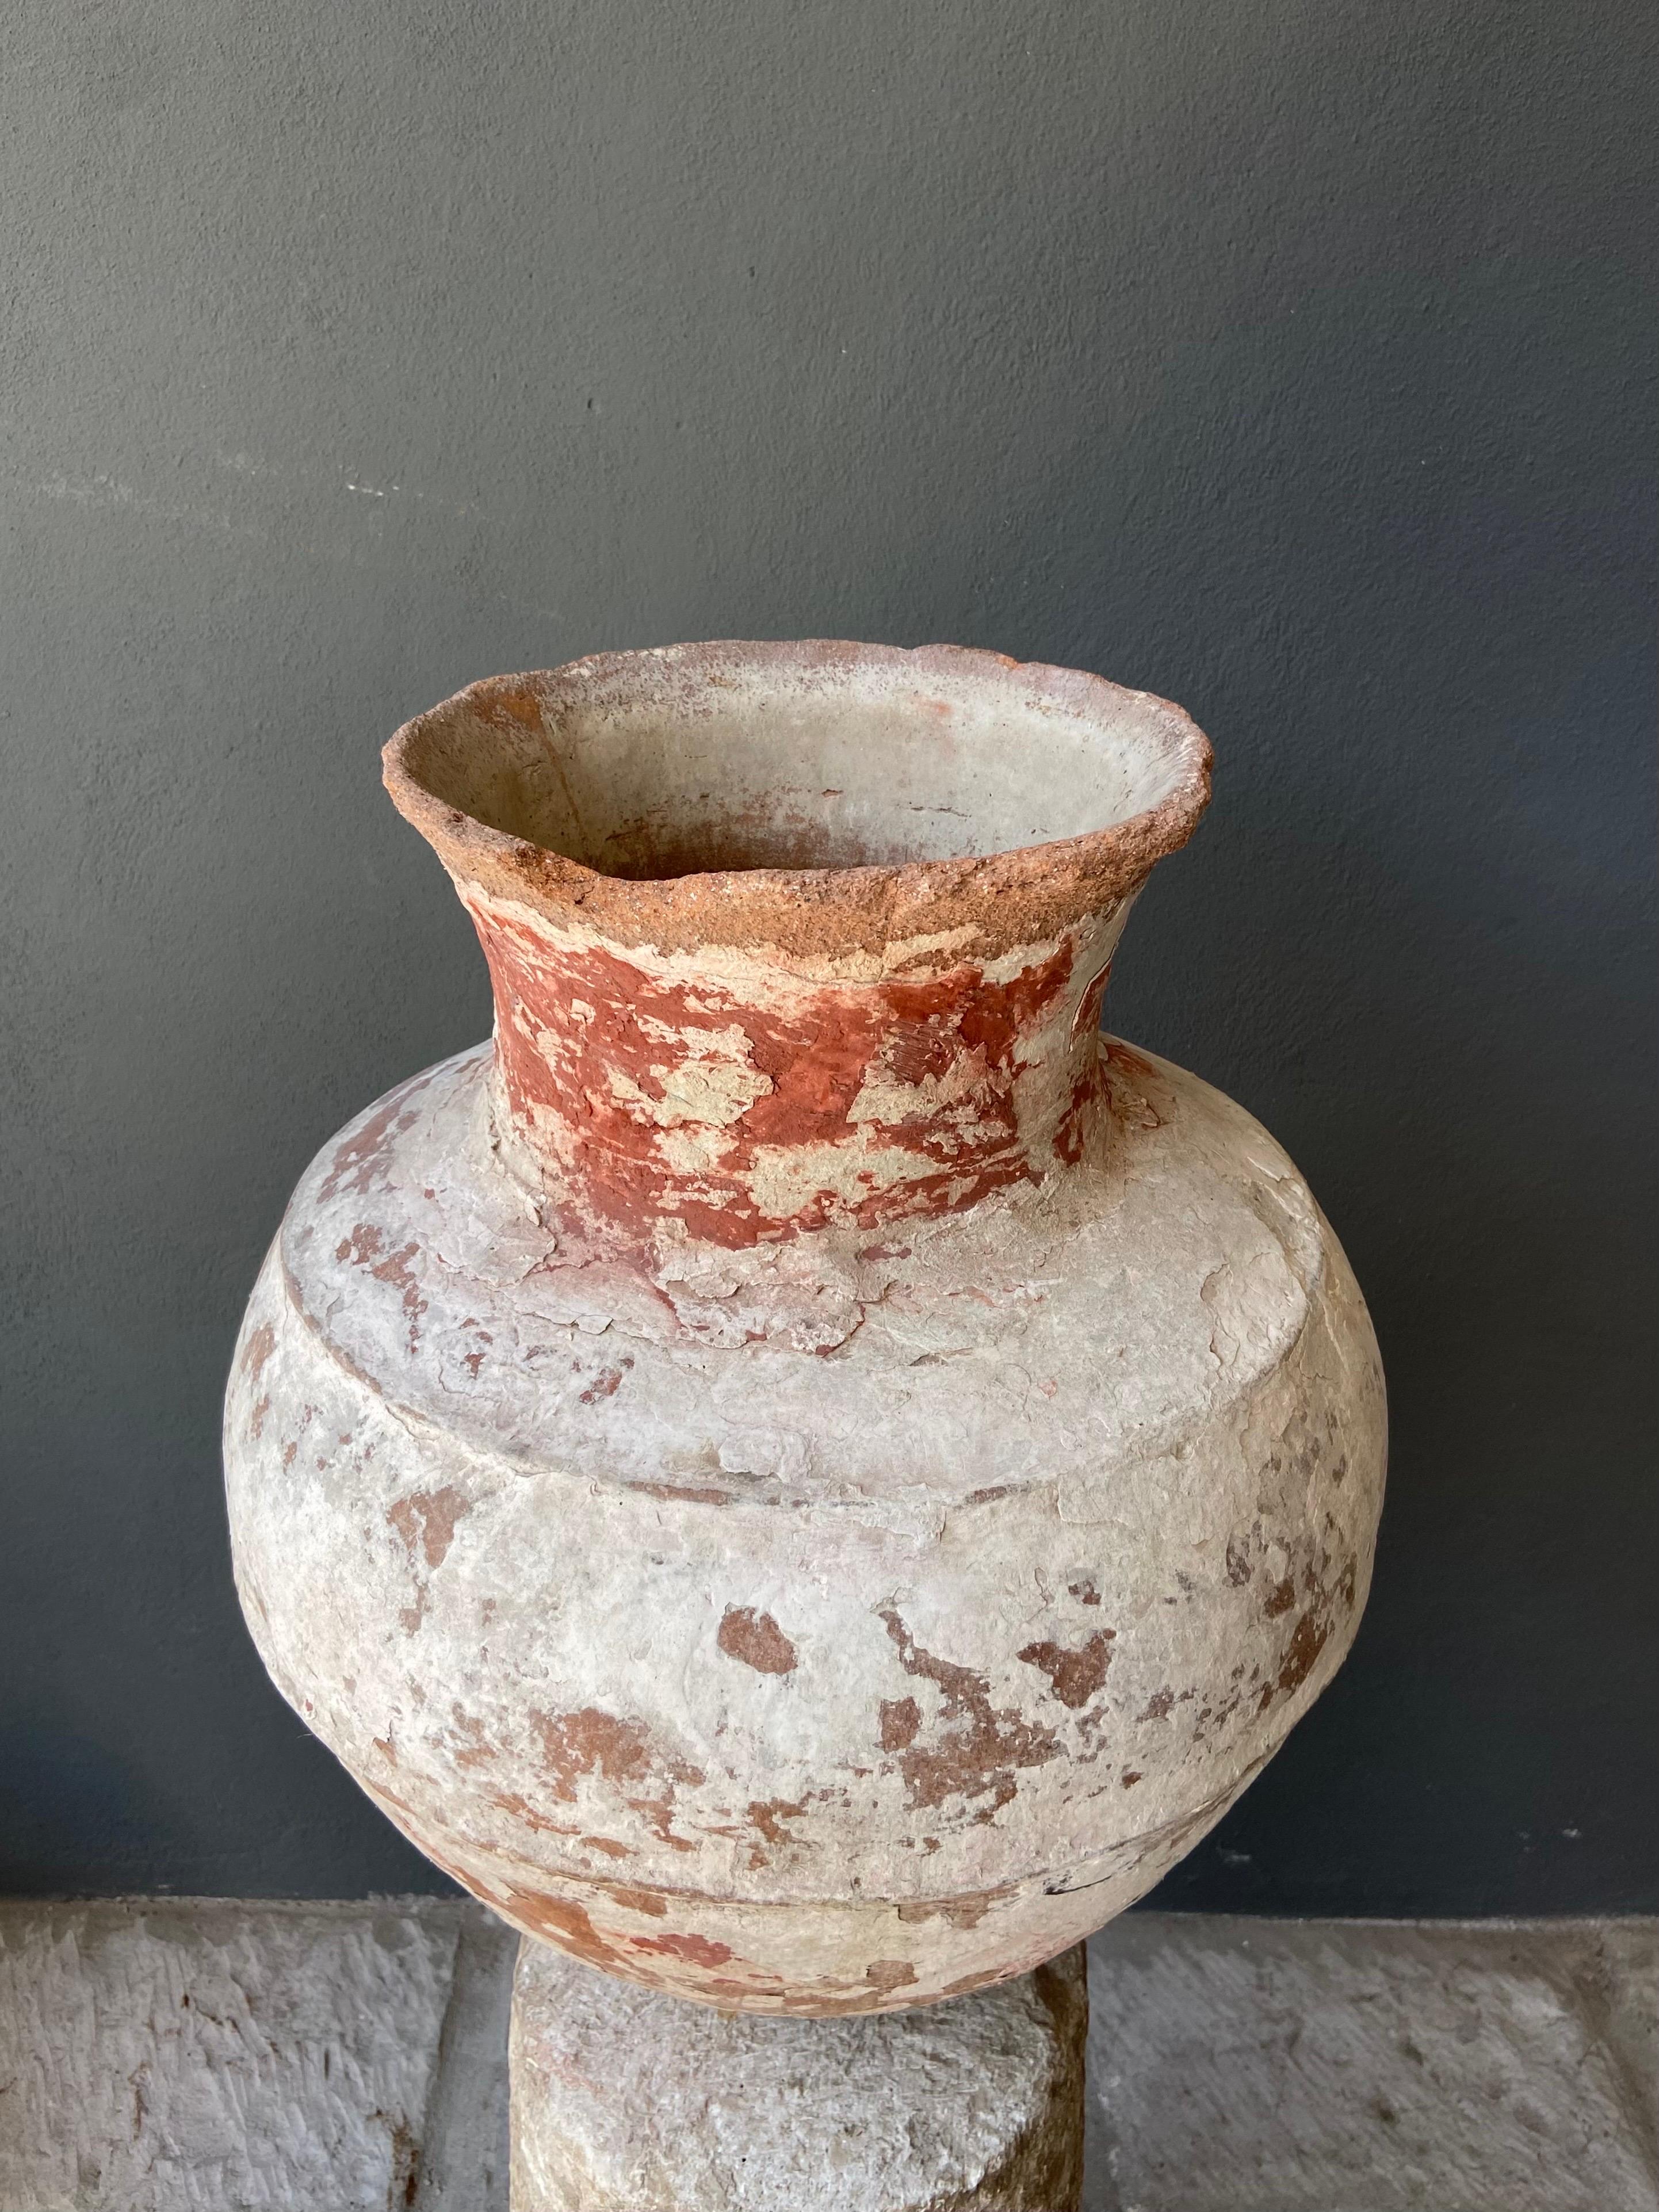 Ceramic water vessel from Central Yucatan, Mexico, circa early 1900s. The original color of the clay is an orange/red, however the piece was repeatedly covered with a lime wash plaster to keep the water cool. Through time and repeated application of